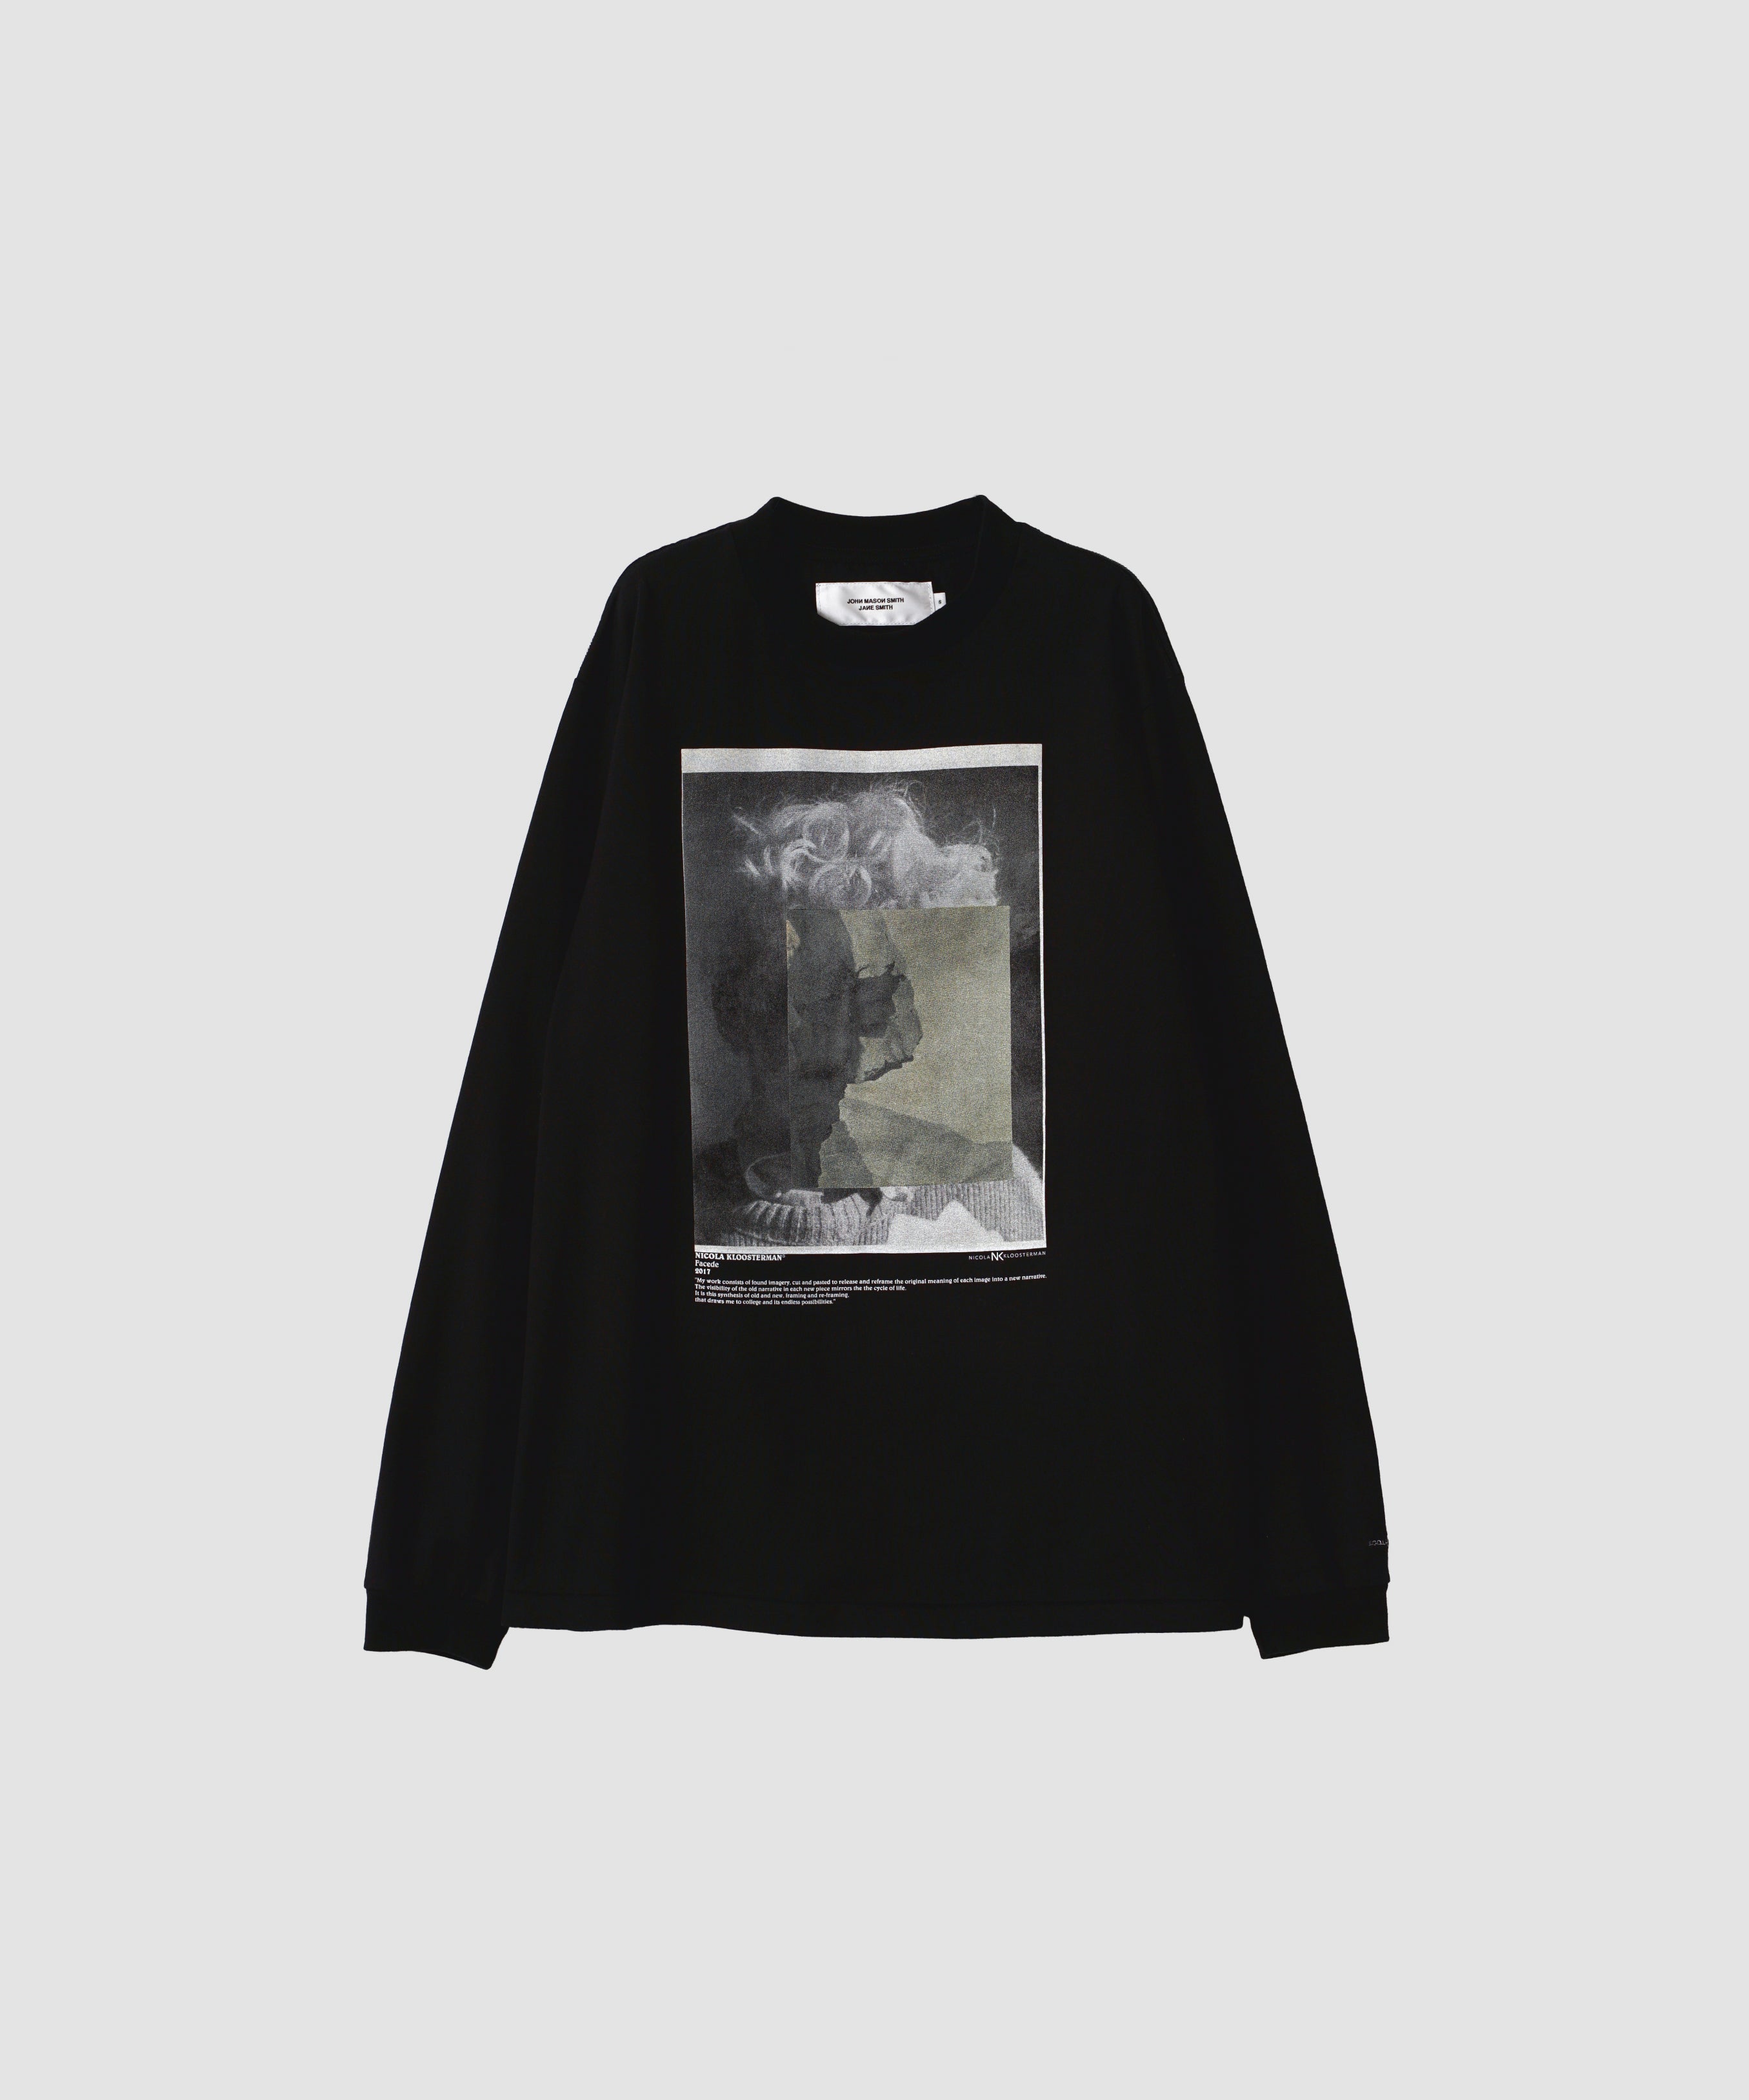 NICOLA KLOOSTERMAN FACED L/S T-SHIRT